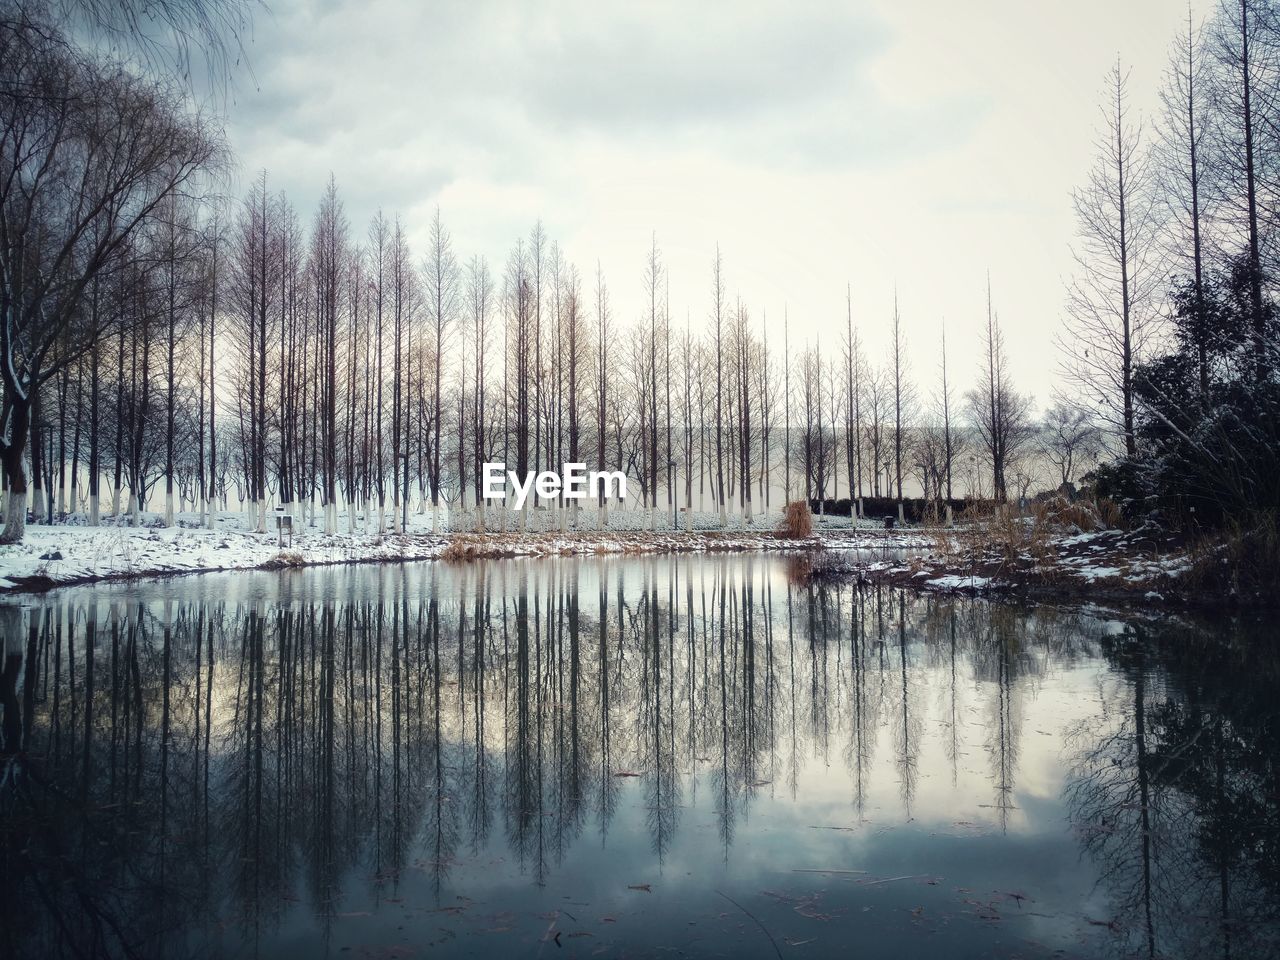 REFLECTION OF BARE TREES IN LAKE